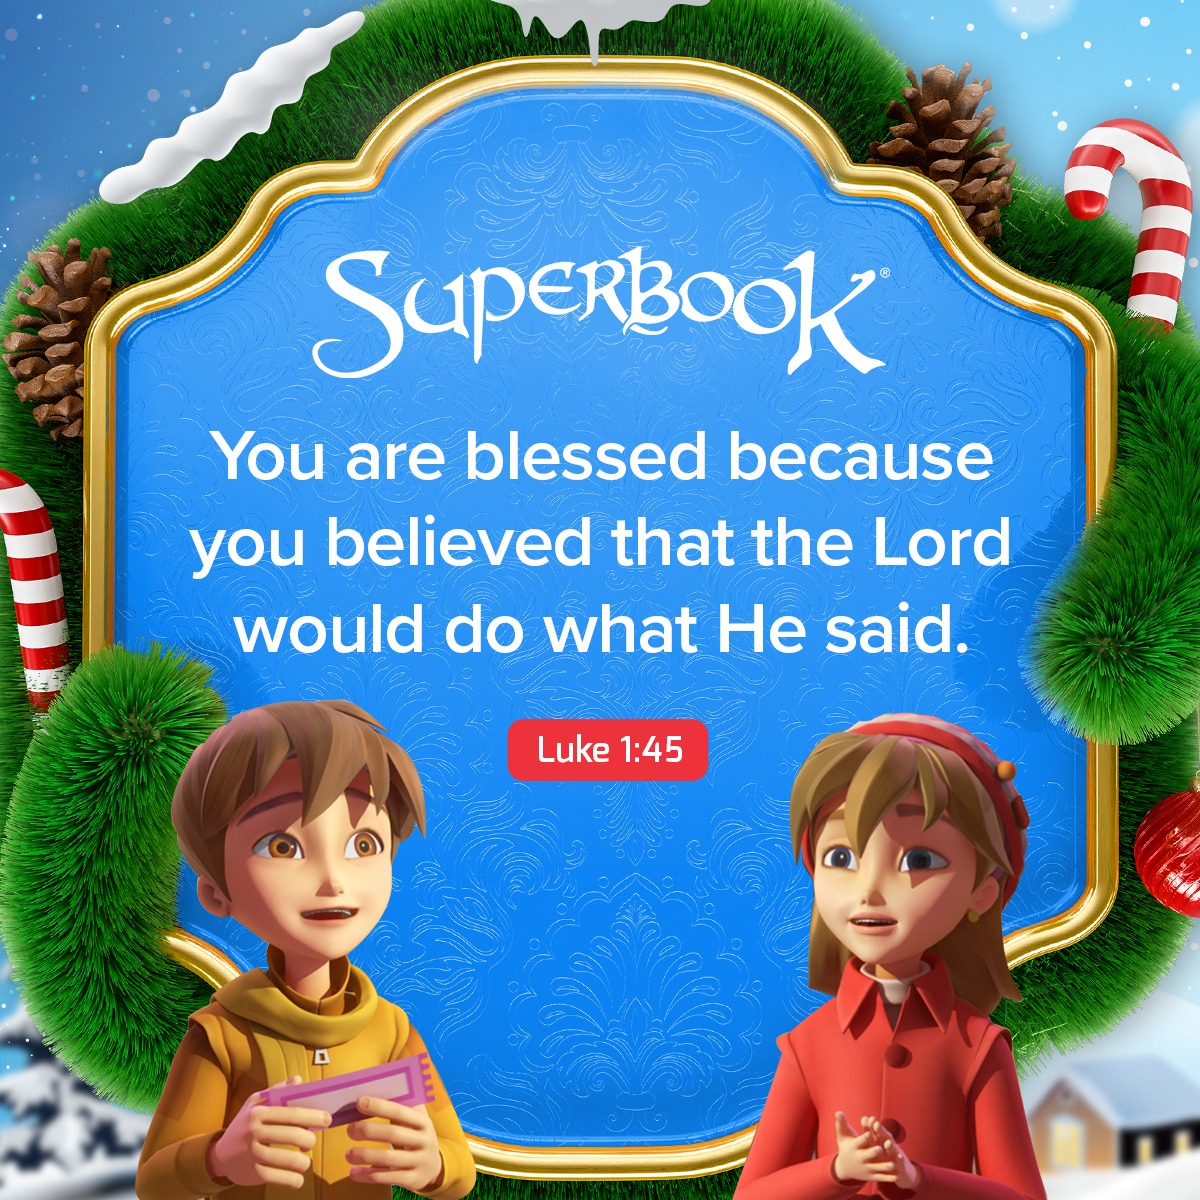 'SuperBook You are blessed because you believed that the Lord would do what He said. Luke 1:45'